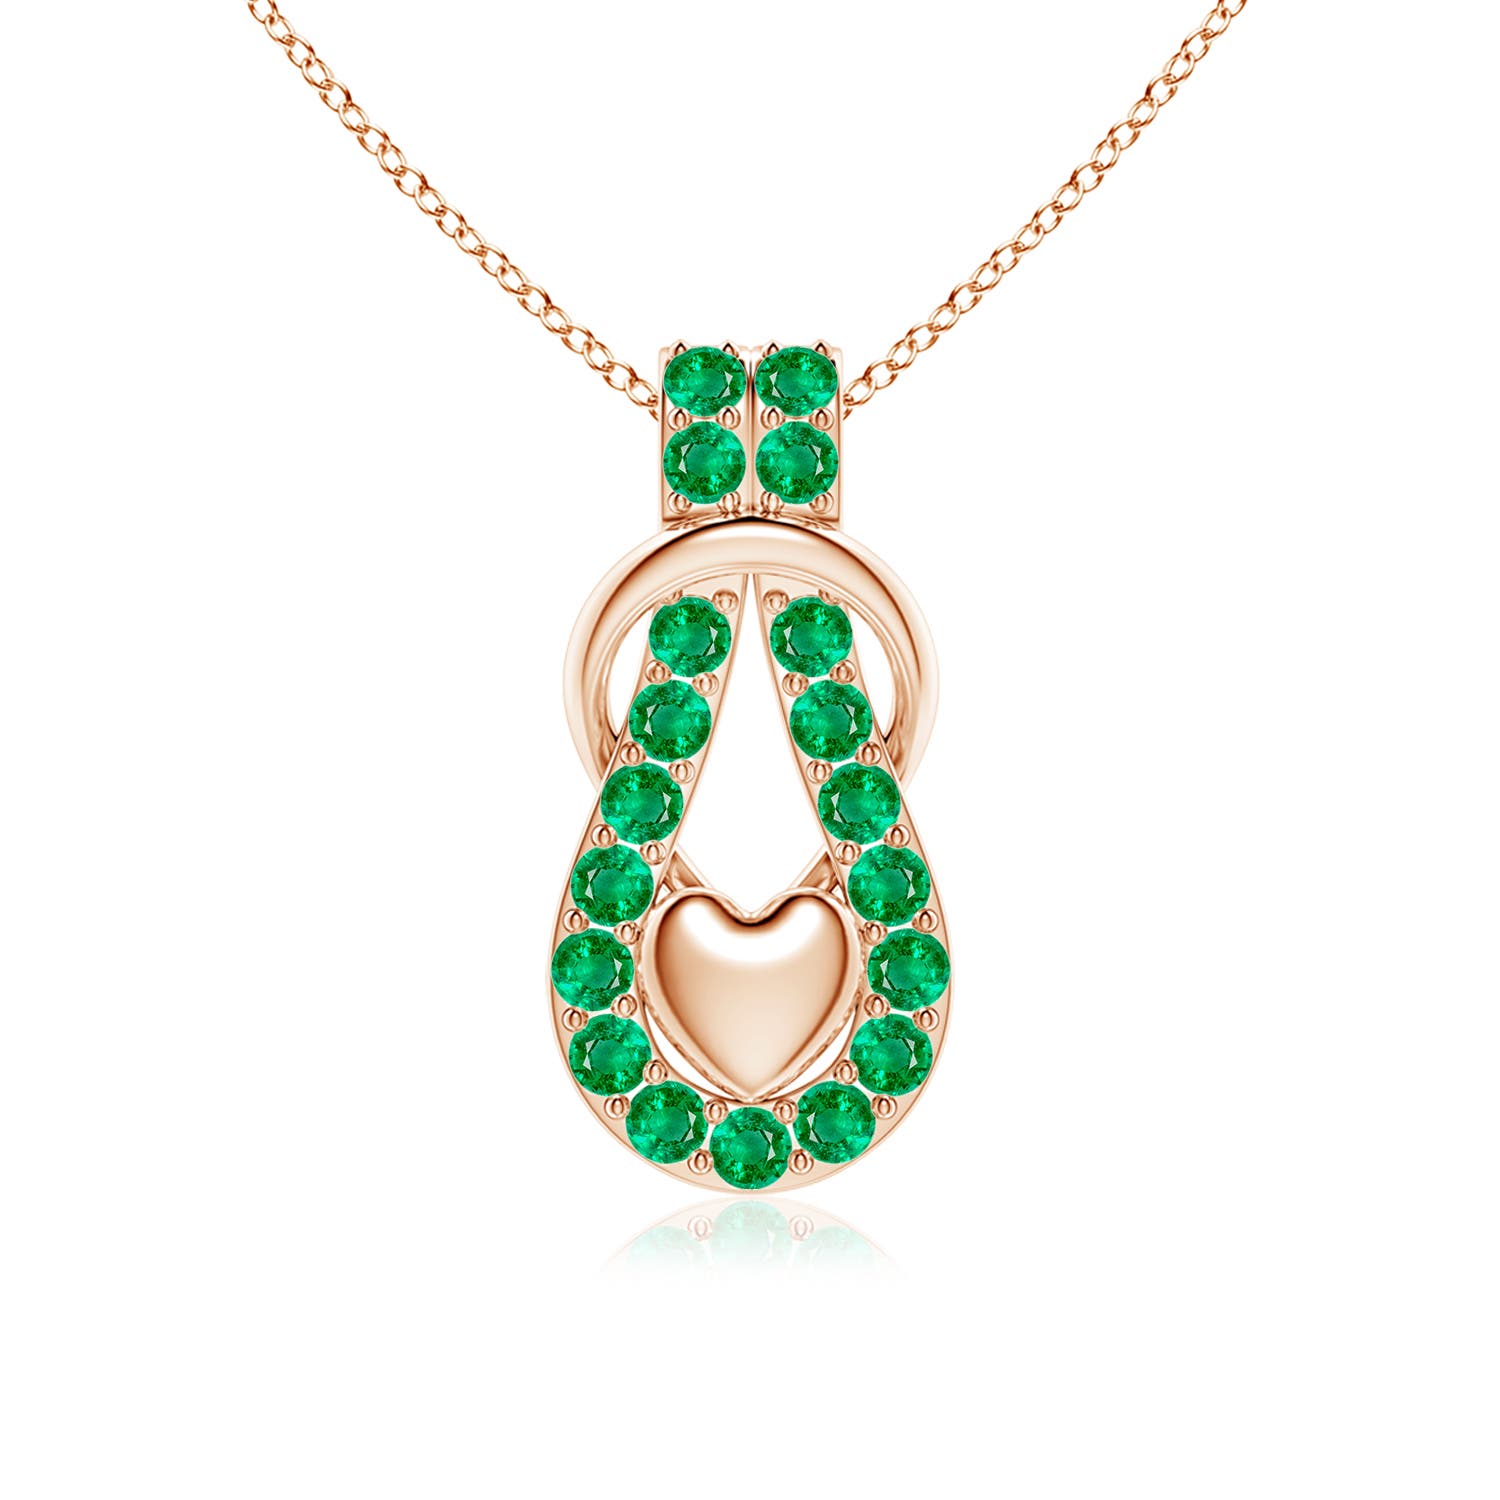 AAA - Emerald / 1.2 CT / 18 KT Rose Gold